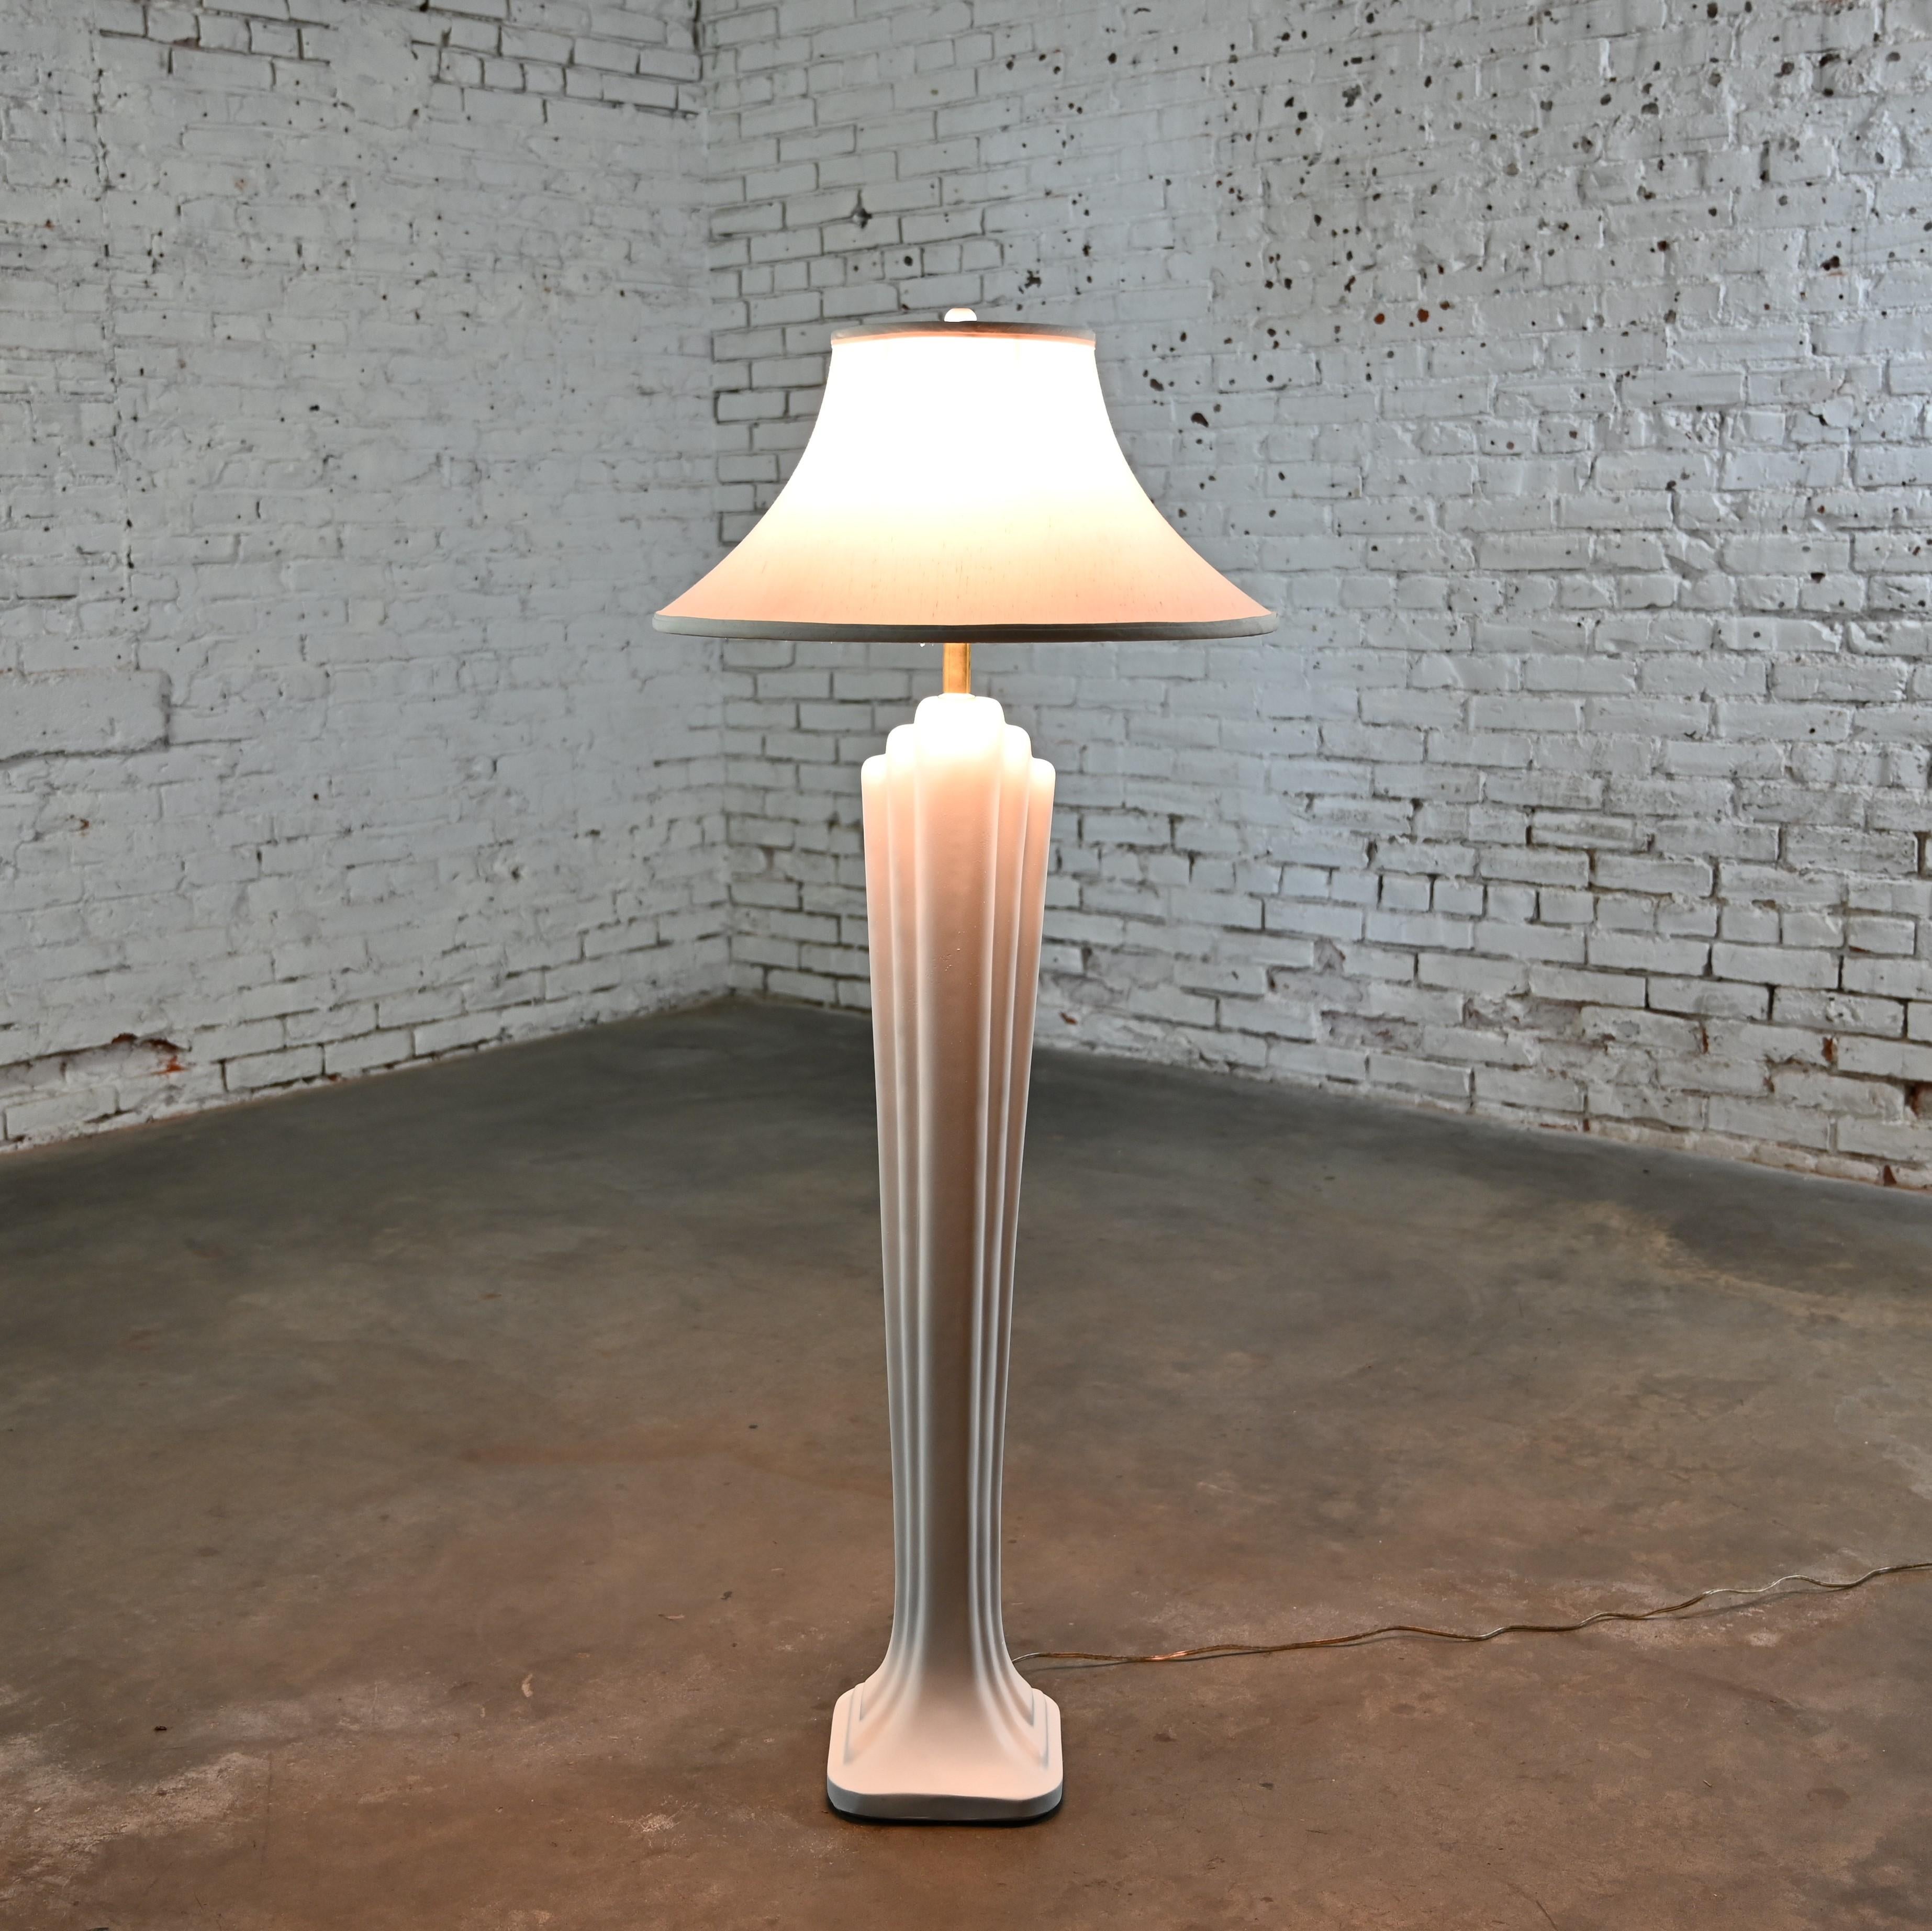 Art Deco Revival to Postmodern Paolo Gucci Floor Lamp White Sculpted Resin  For Sale 2